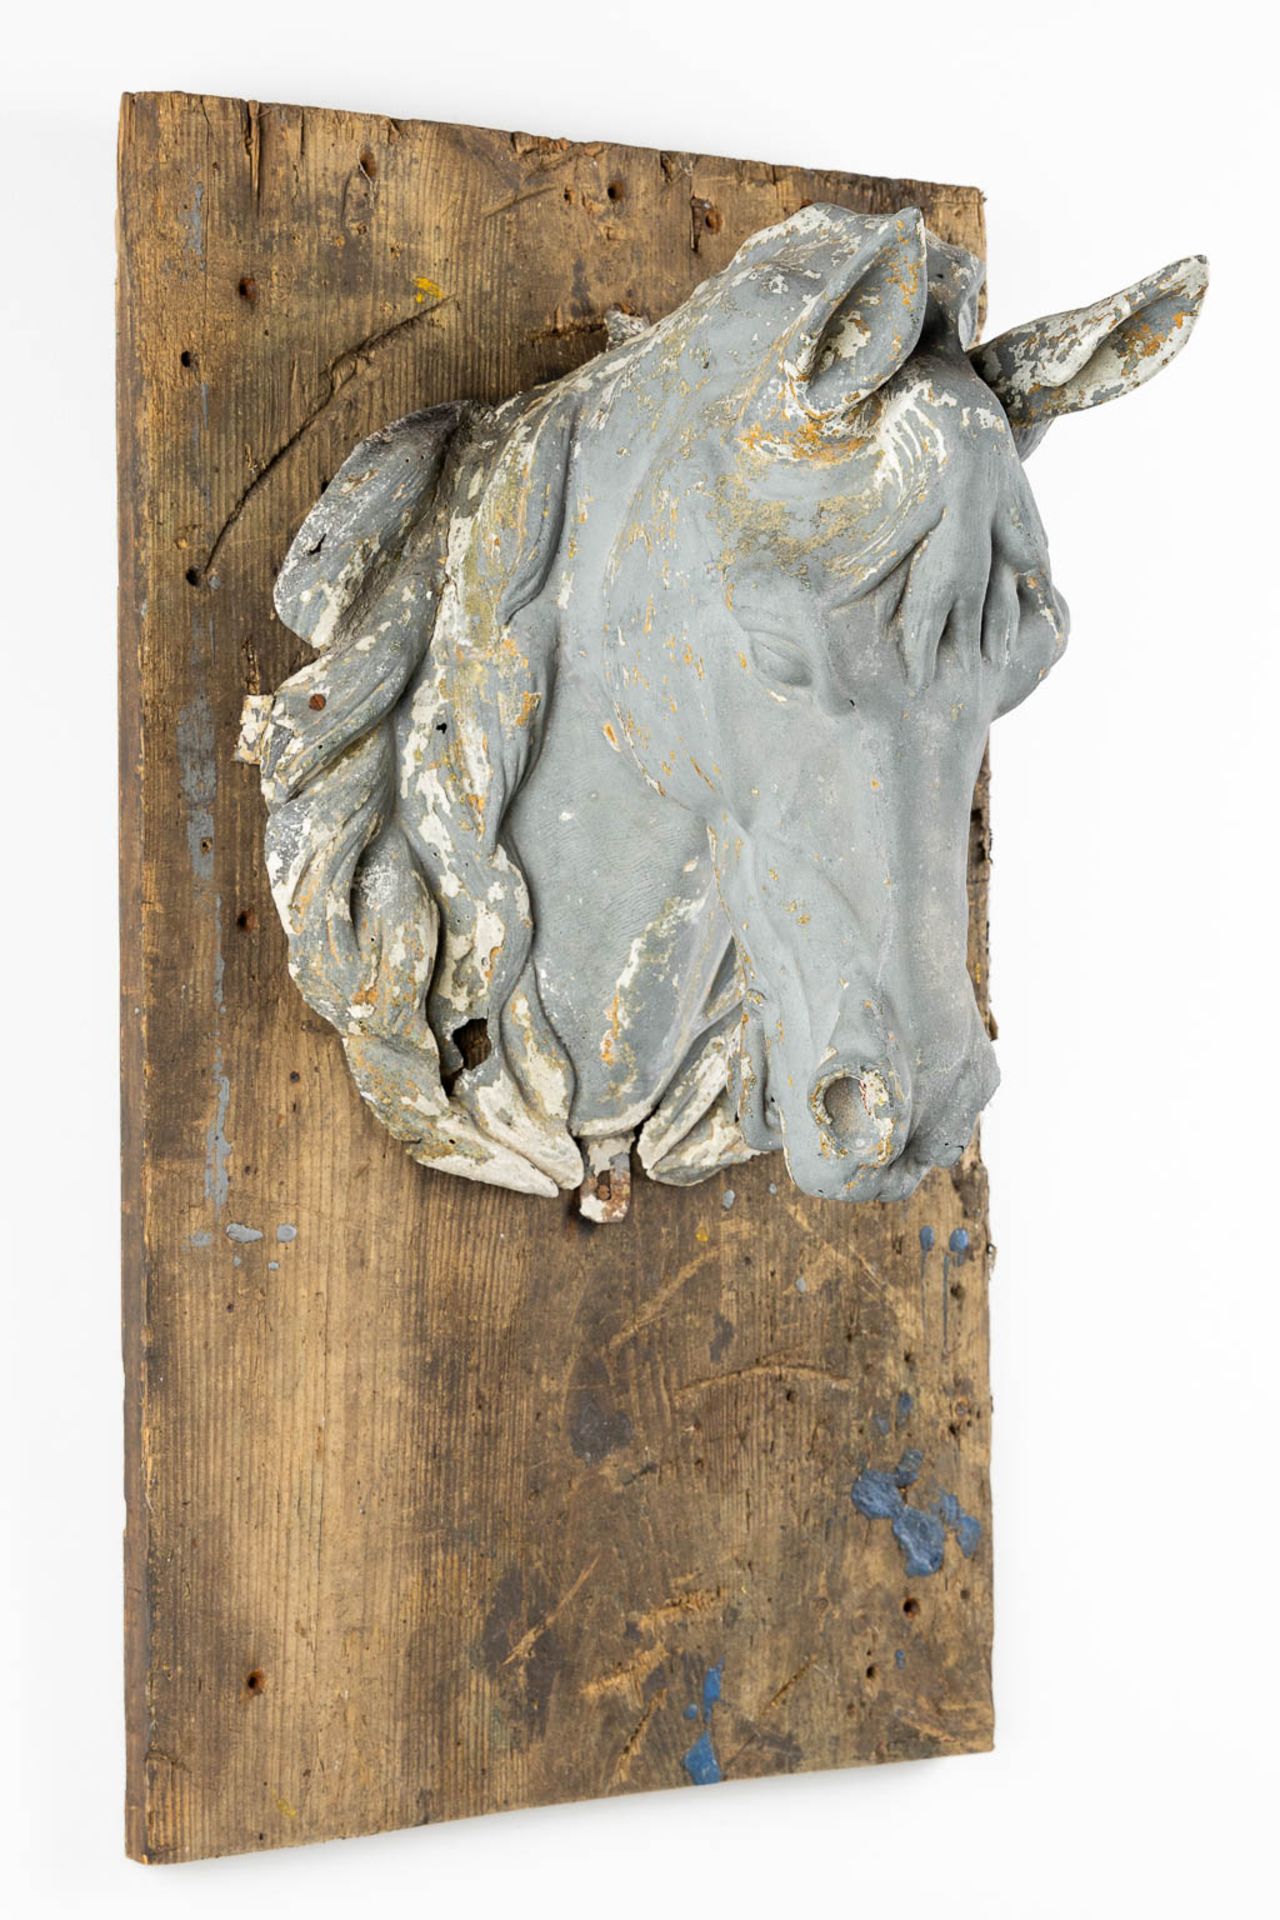 An antique zinc Horse Head, mounted on a wood board. Circa 1920. (L:40 x W:39 x H:44 cm) - Image 5 of 13